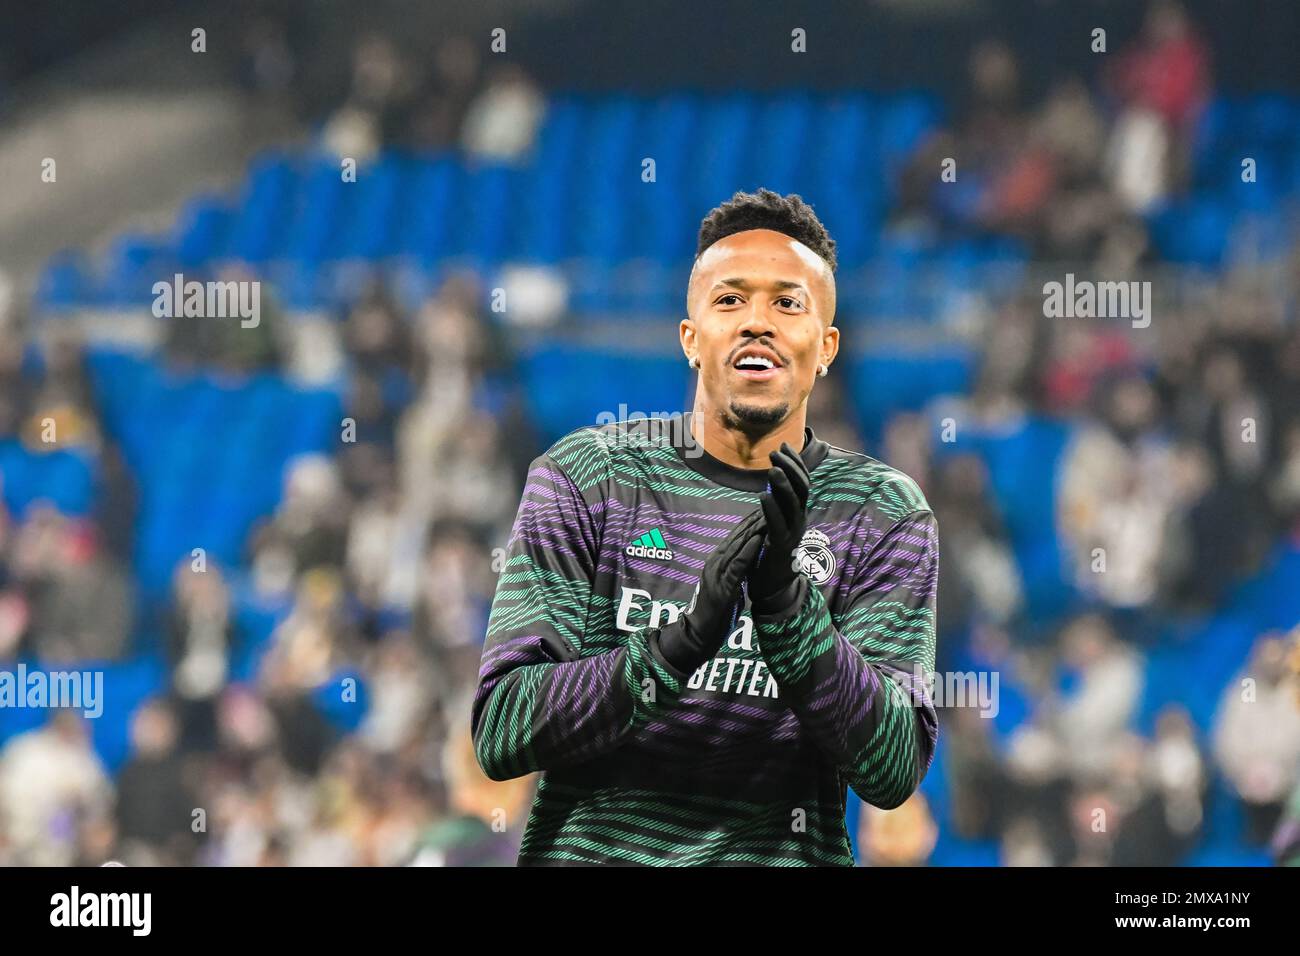 MADRID, SPAIN - FEBRUARY 2: Éder Militao of Real Madrid CF in the warm up of the match between Real Madrid CF and Valencia CF of La Liga Santander on February 2, 2022 at Santiago Bernabeu of Madrid, Spain. (Photo by Samuel Carreño/ PX Images) Stock Photo